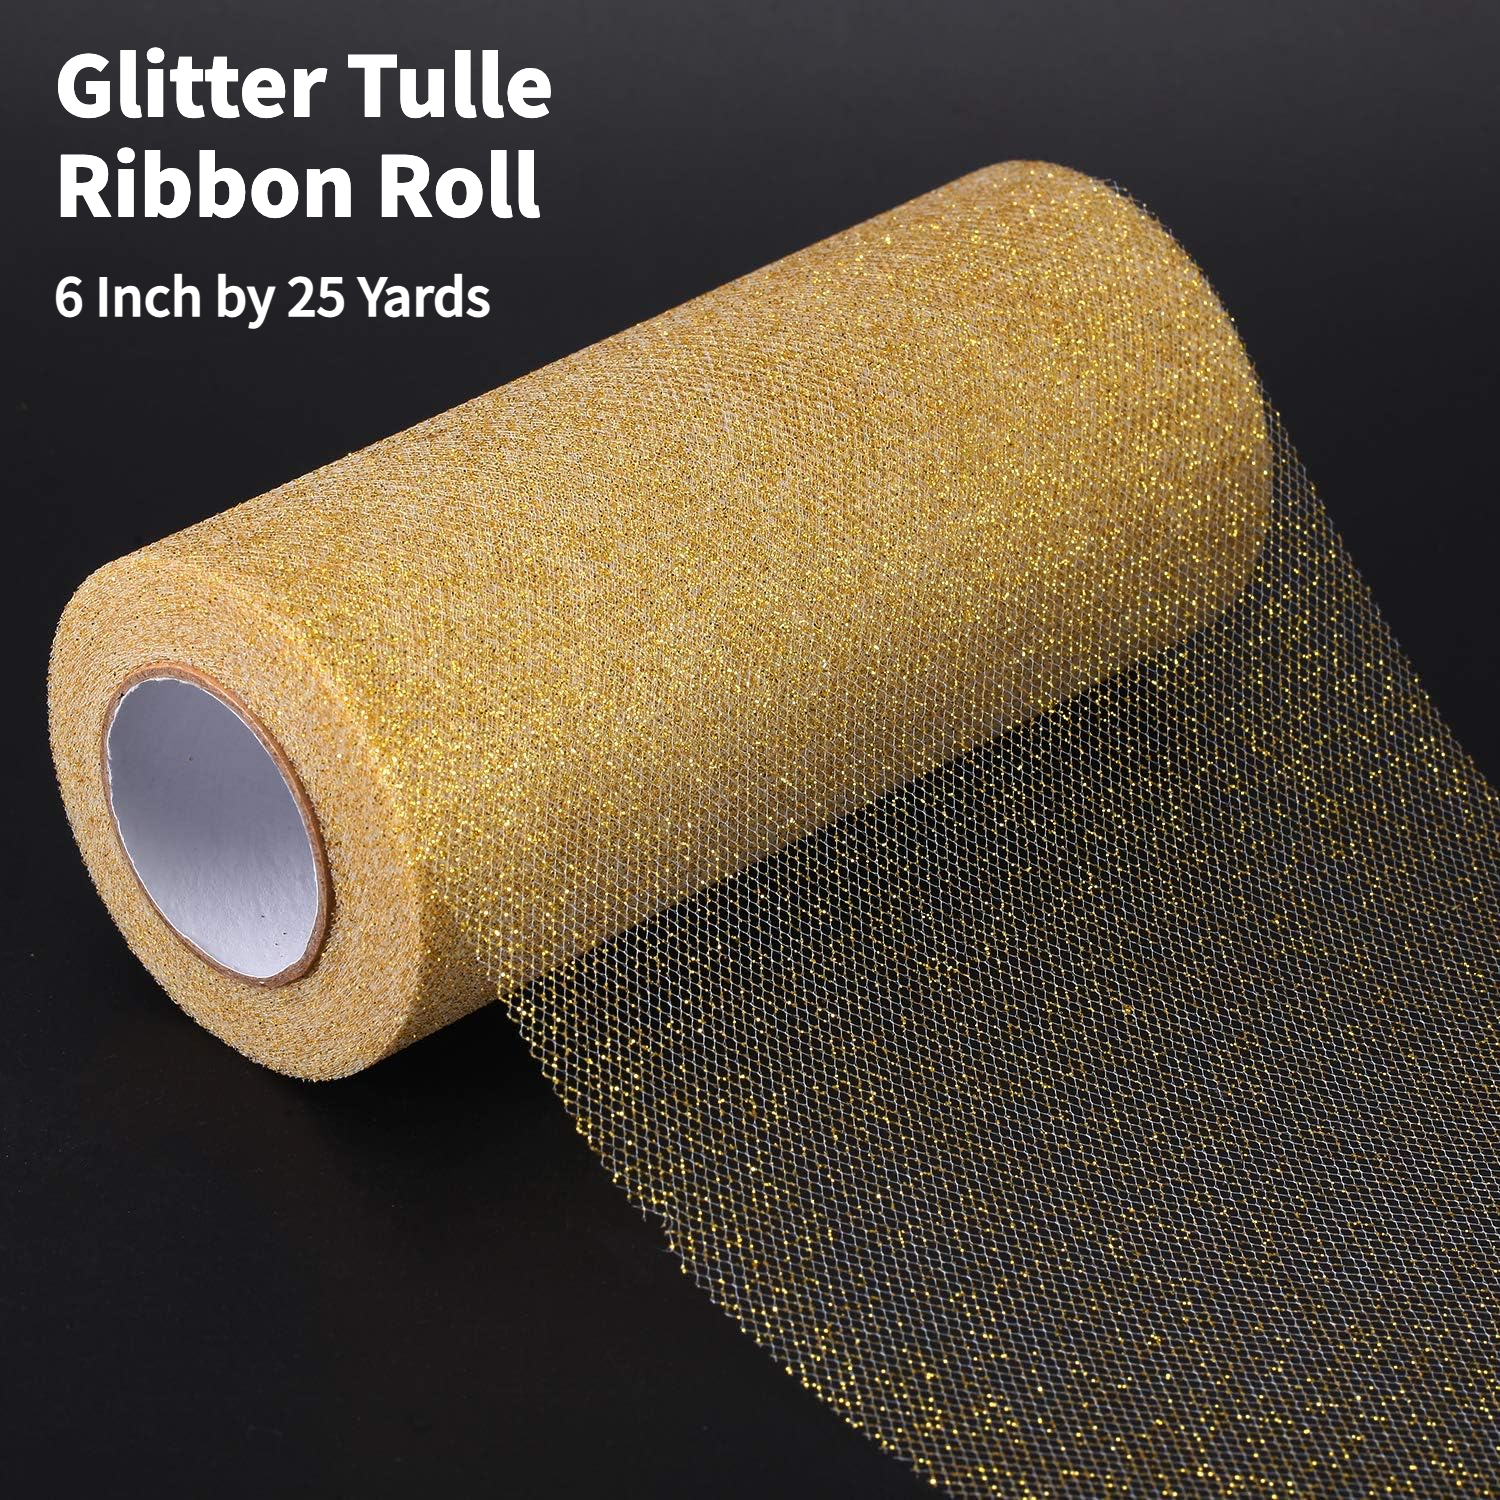 Trimming Shop 11 Inch x 27 Yards Gold Tulle Roll Sparkle Sequin Glitter  Mesh Fabric for DIY Tutu Skirt